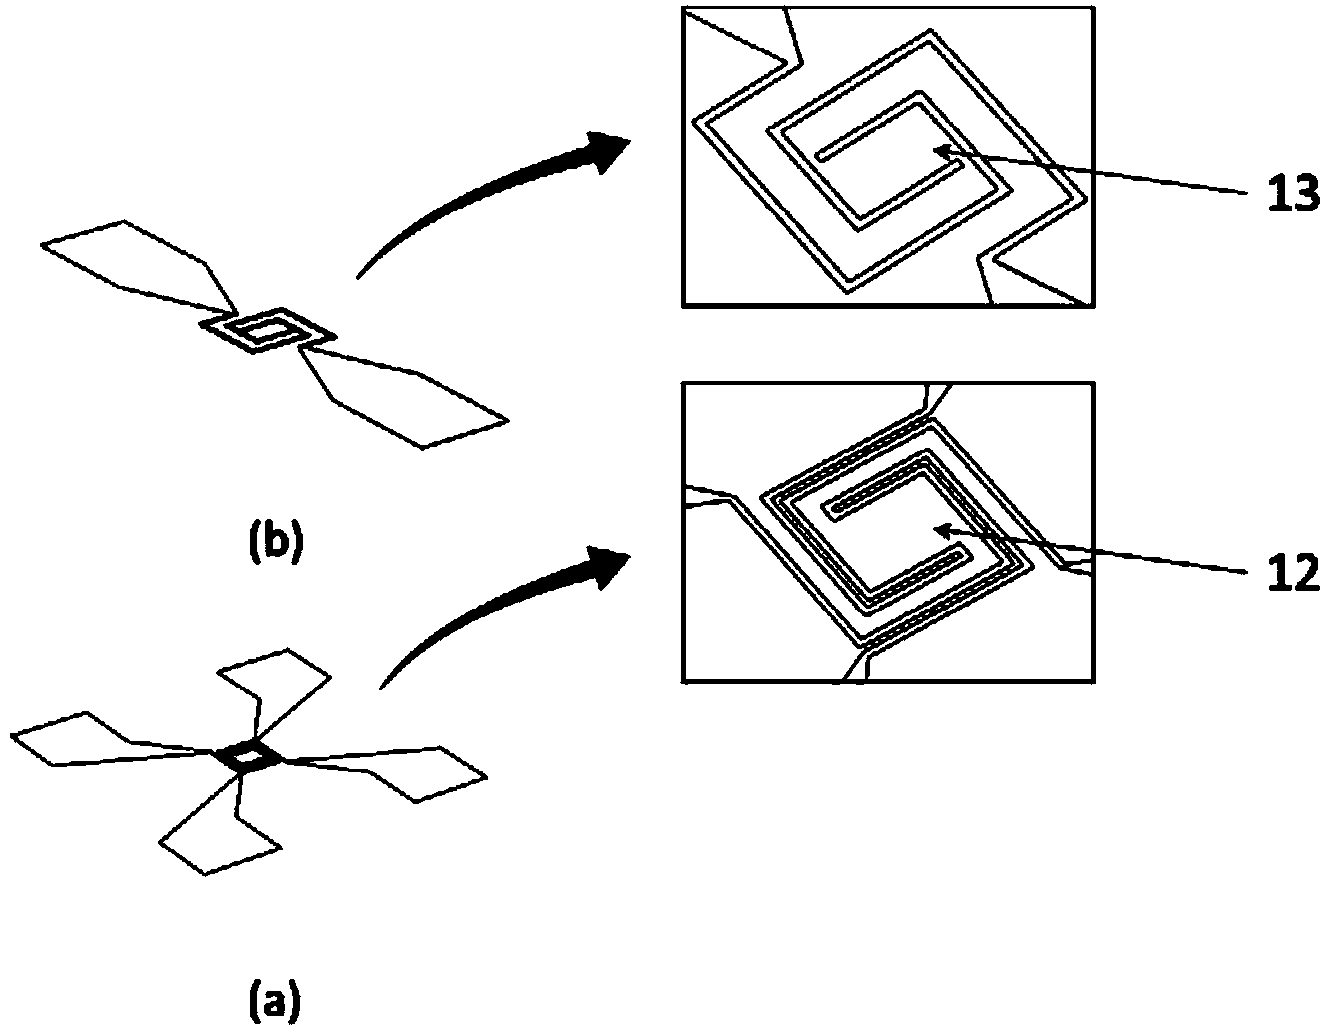 Metal-oxide gas sensor based on MEMS (Micro-Electro-Mechanic System) and preparation technology thereof